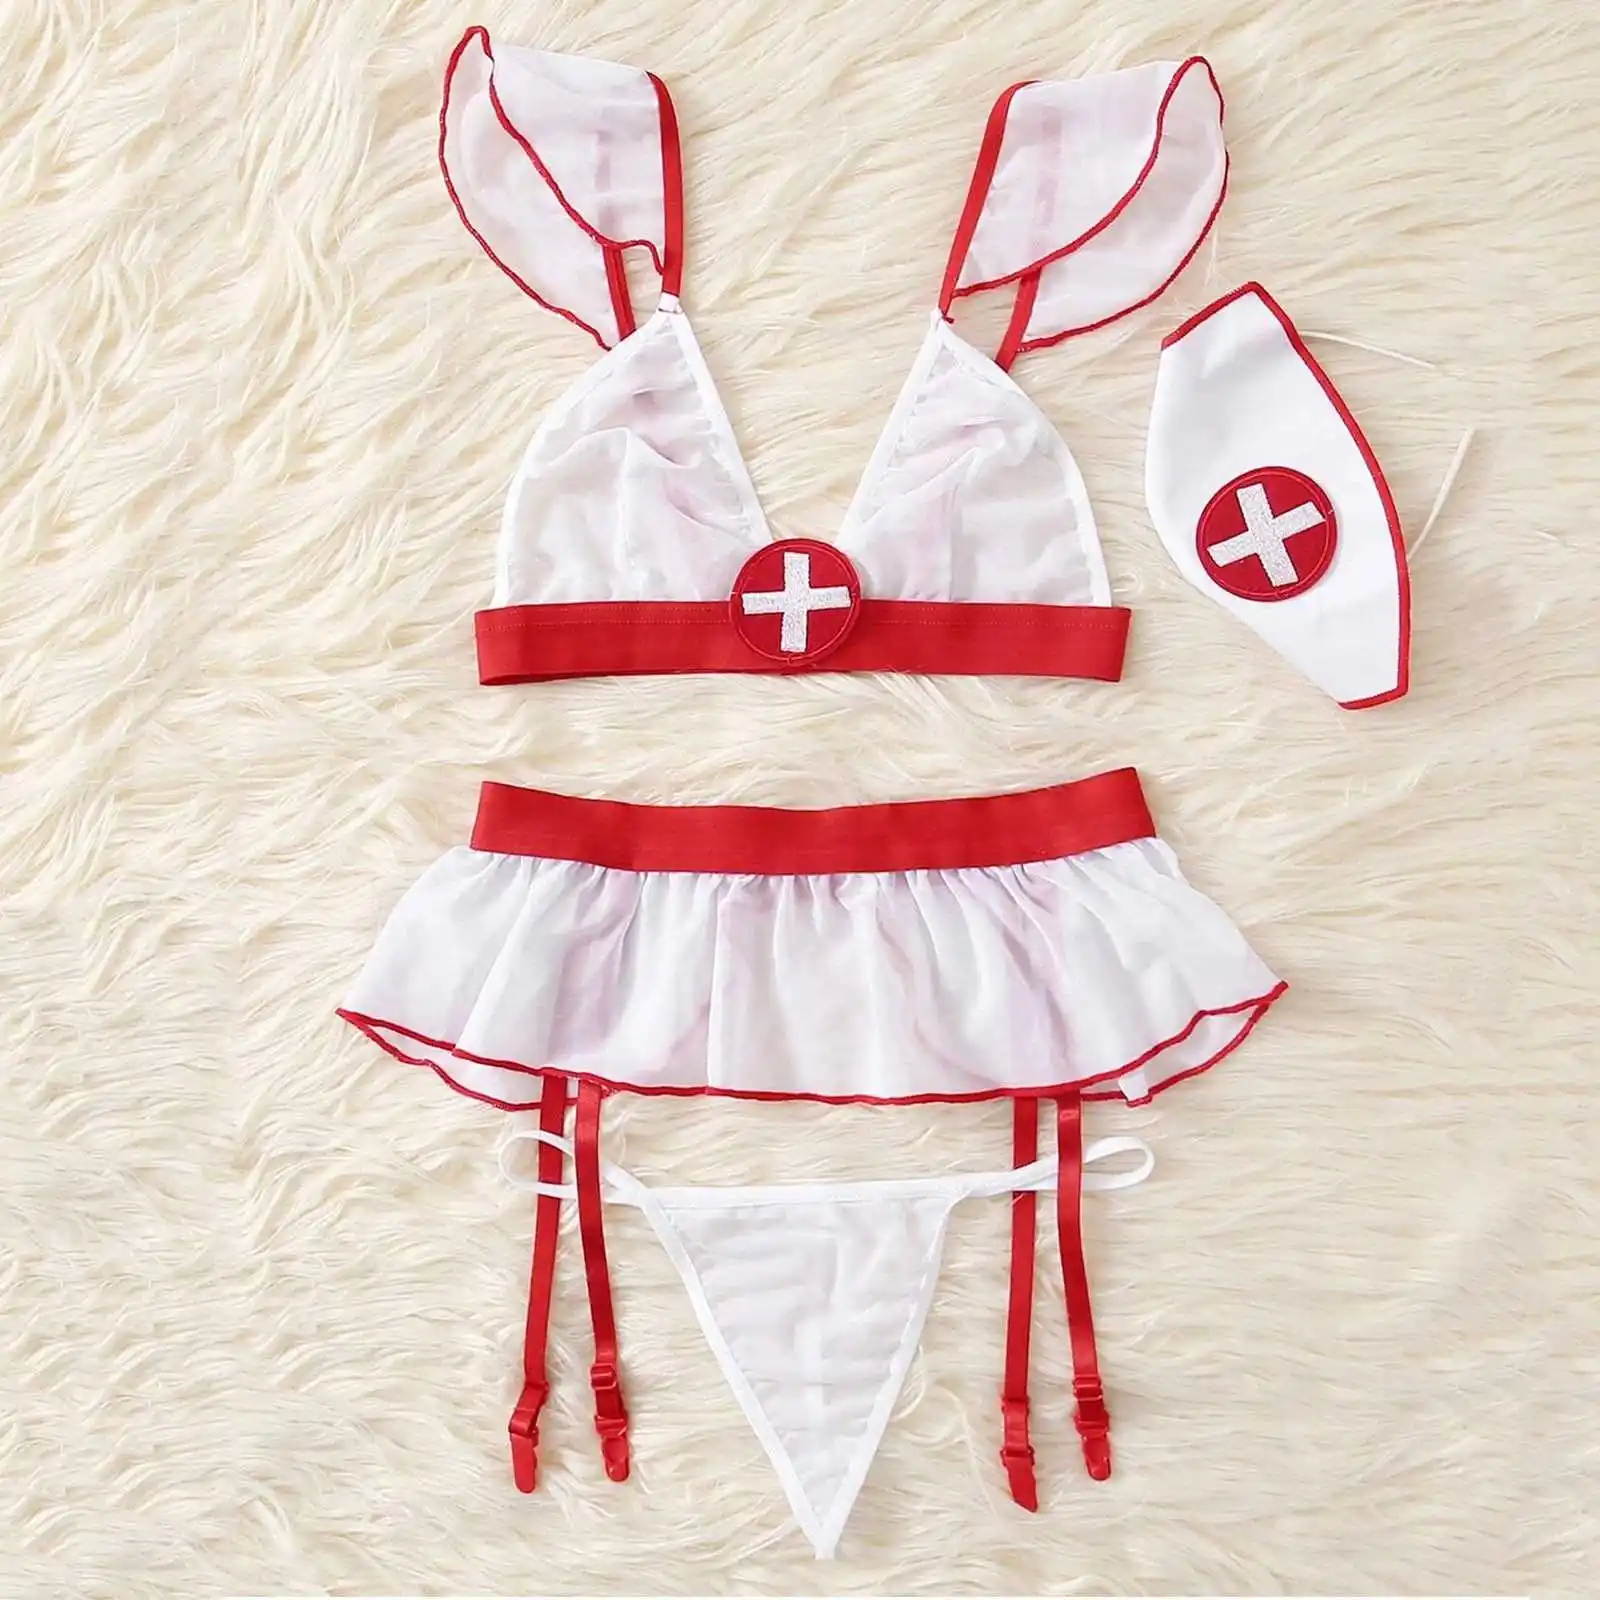 China factory price sexy white and red nurse cosplay costume underwear set erotic sexy short role play lingerie uniform